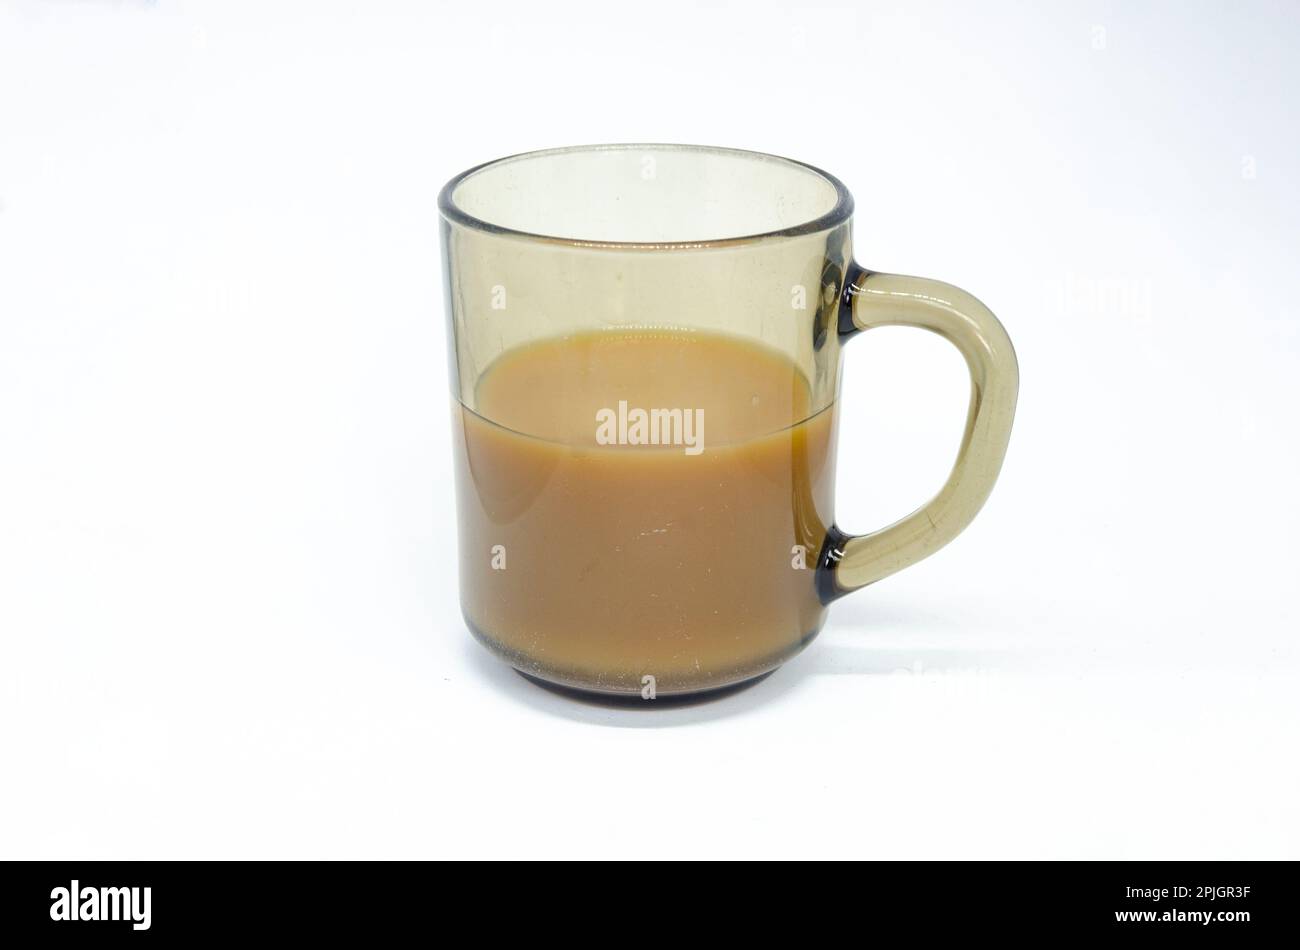 A mug of tea in a glass mug isolated against a white background. Stock Photo